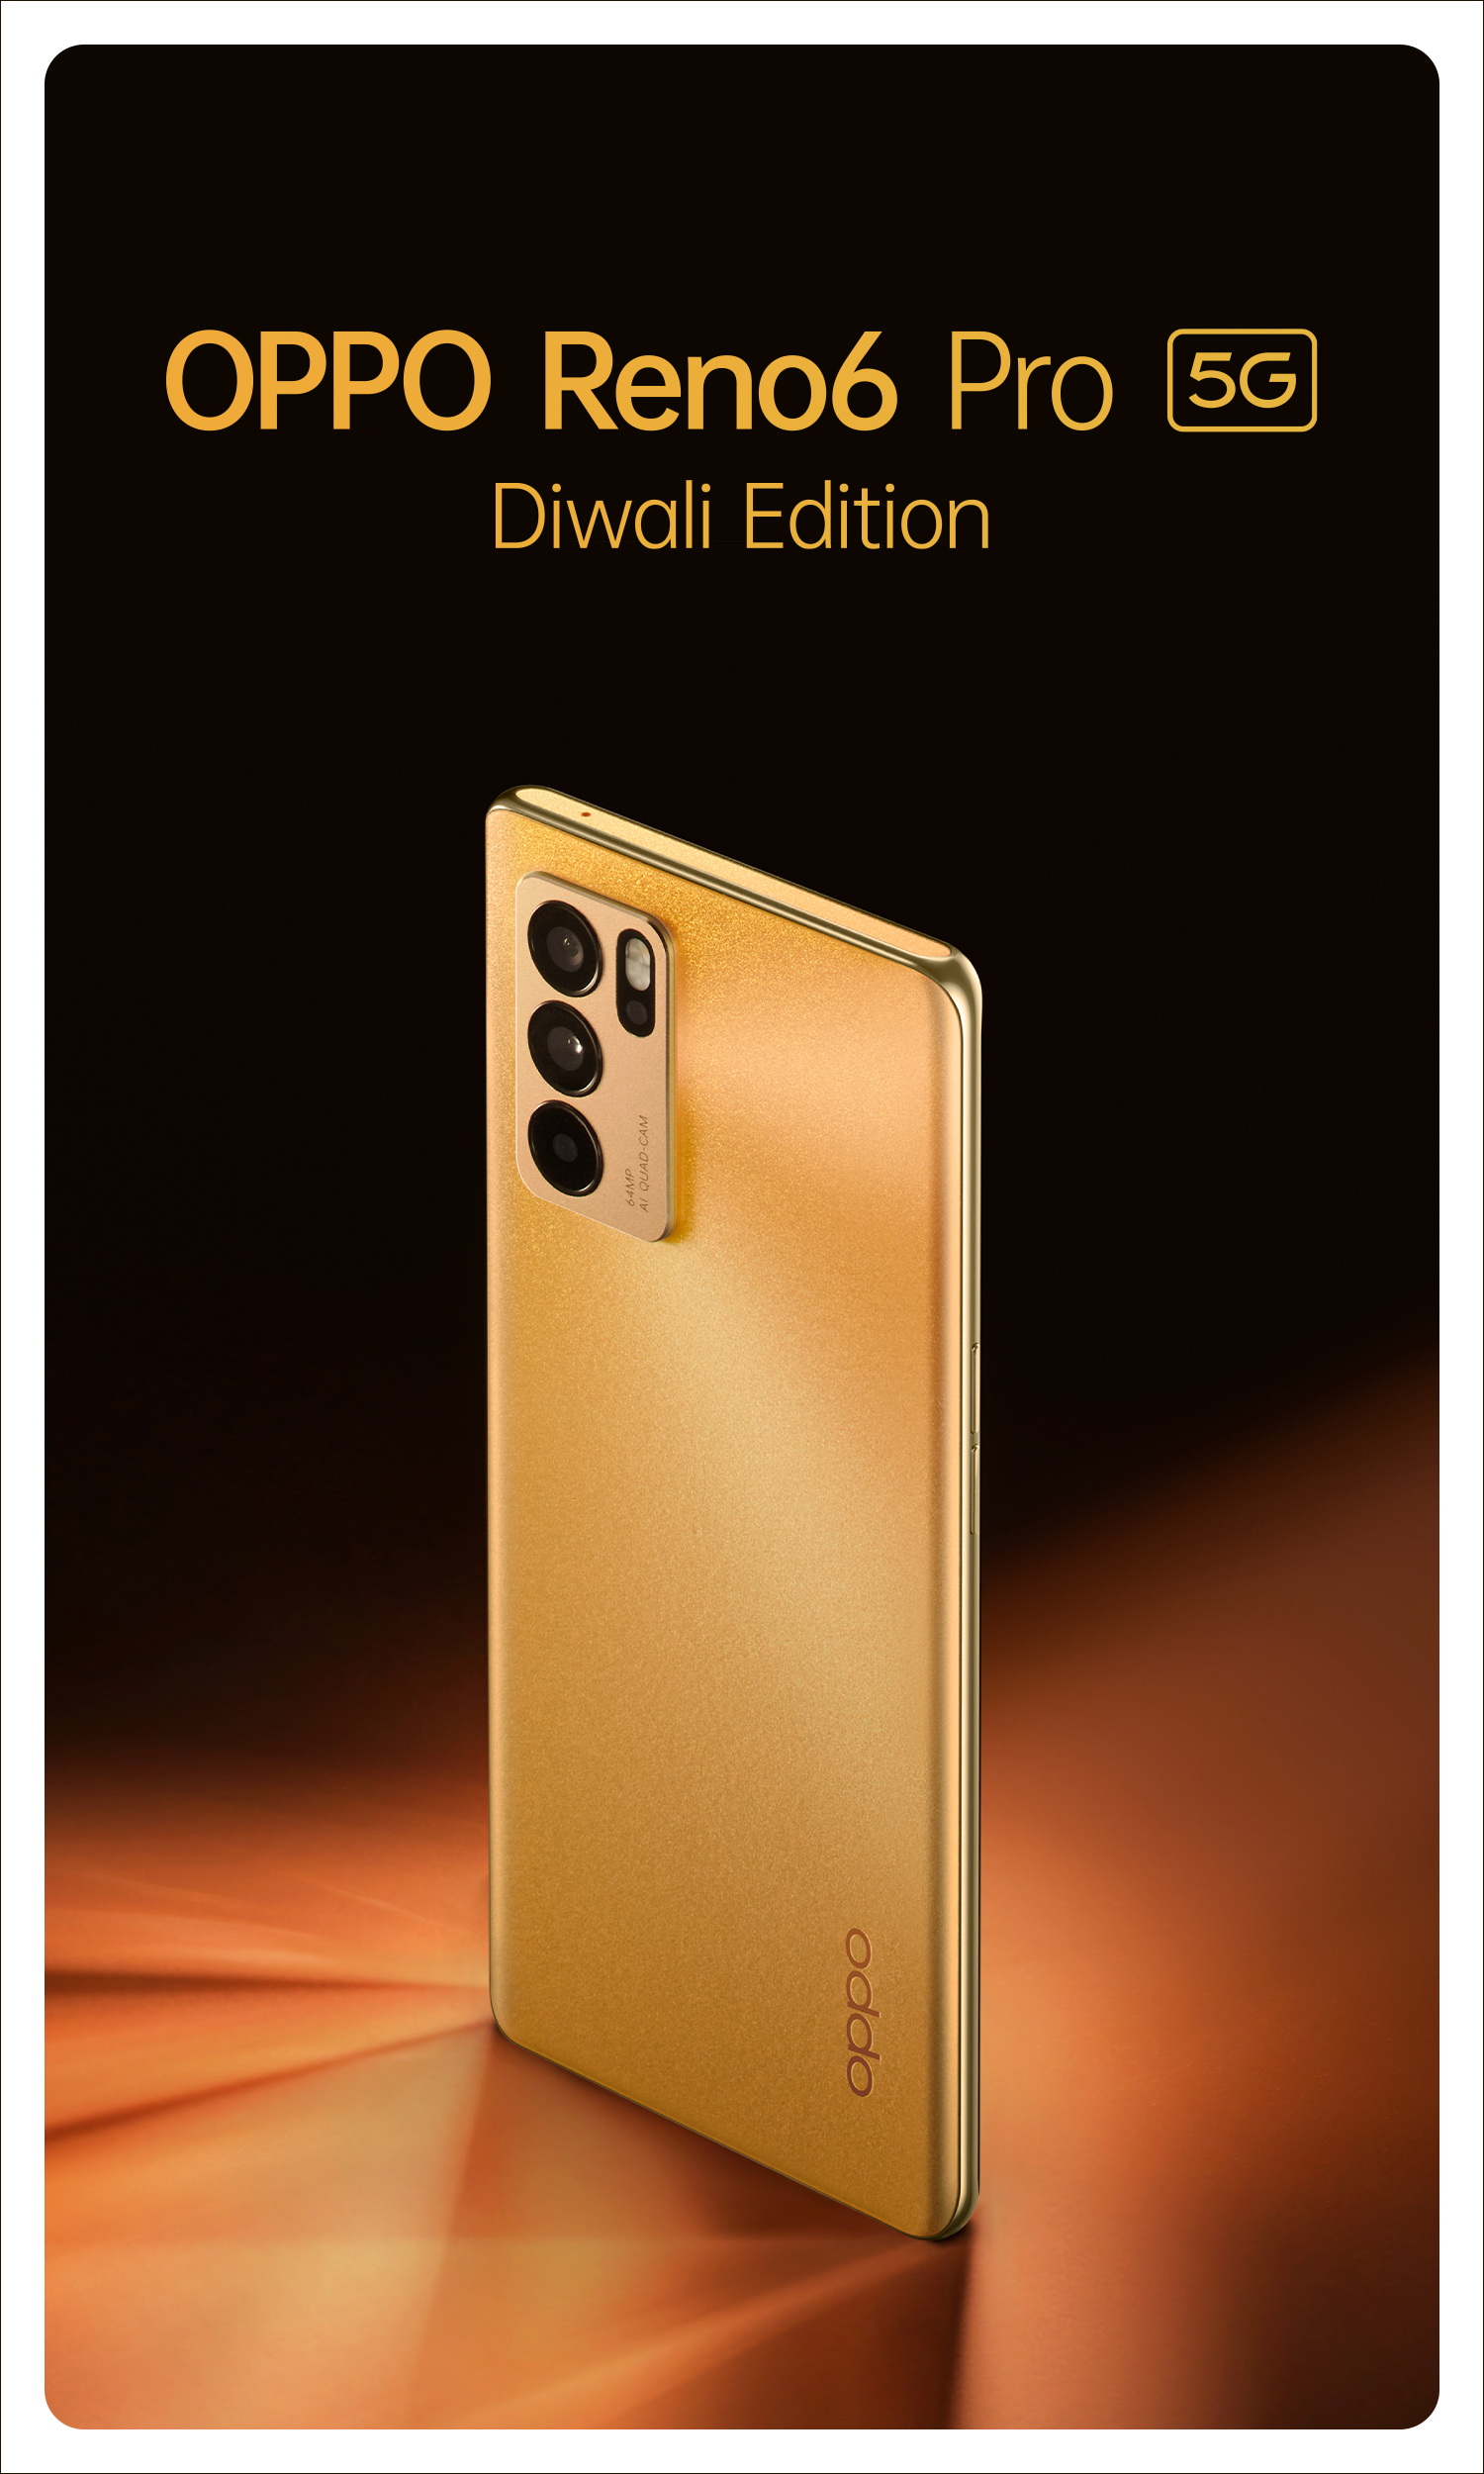 OPPO India welcomes the Festive Season with special-edition launches of OPPO Reno6 Pro 5G Diwali edition,OPPO F19s and OPPO Enco Buds Blue decoding=